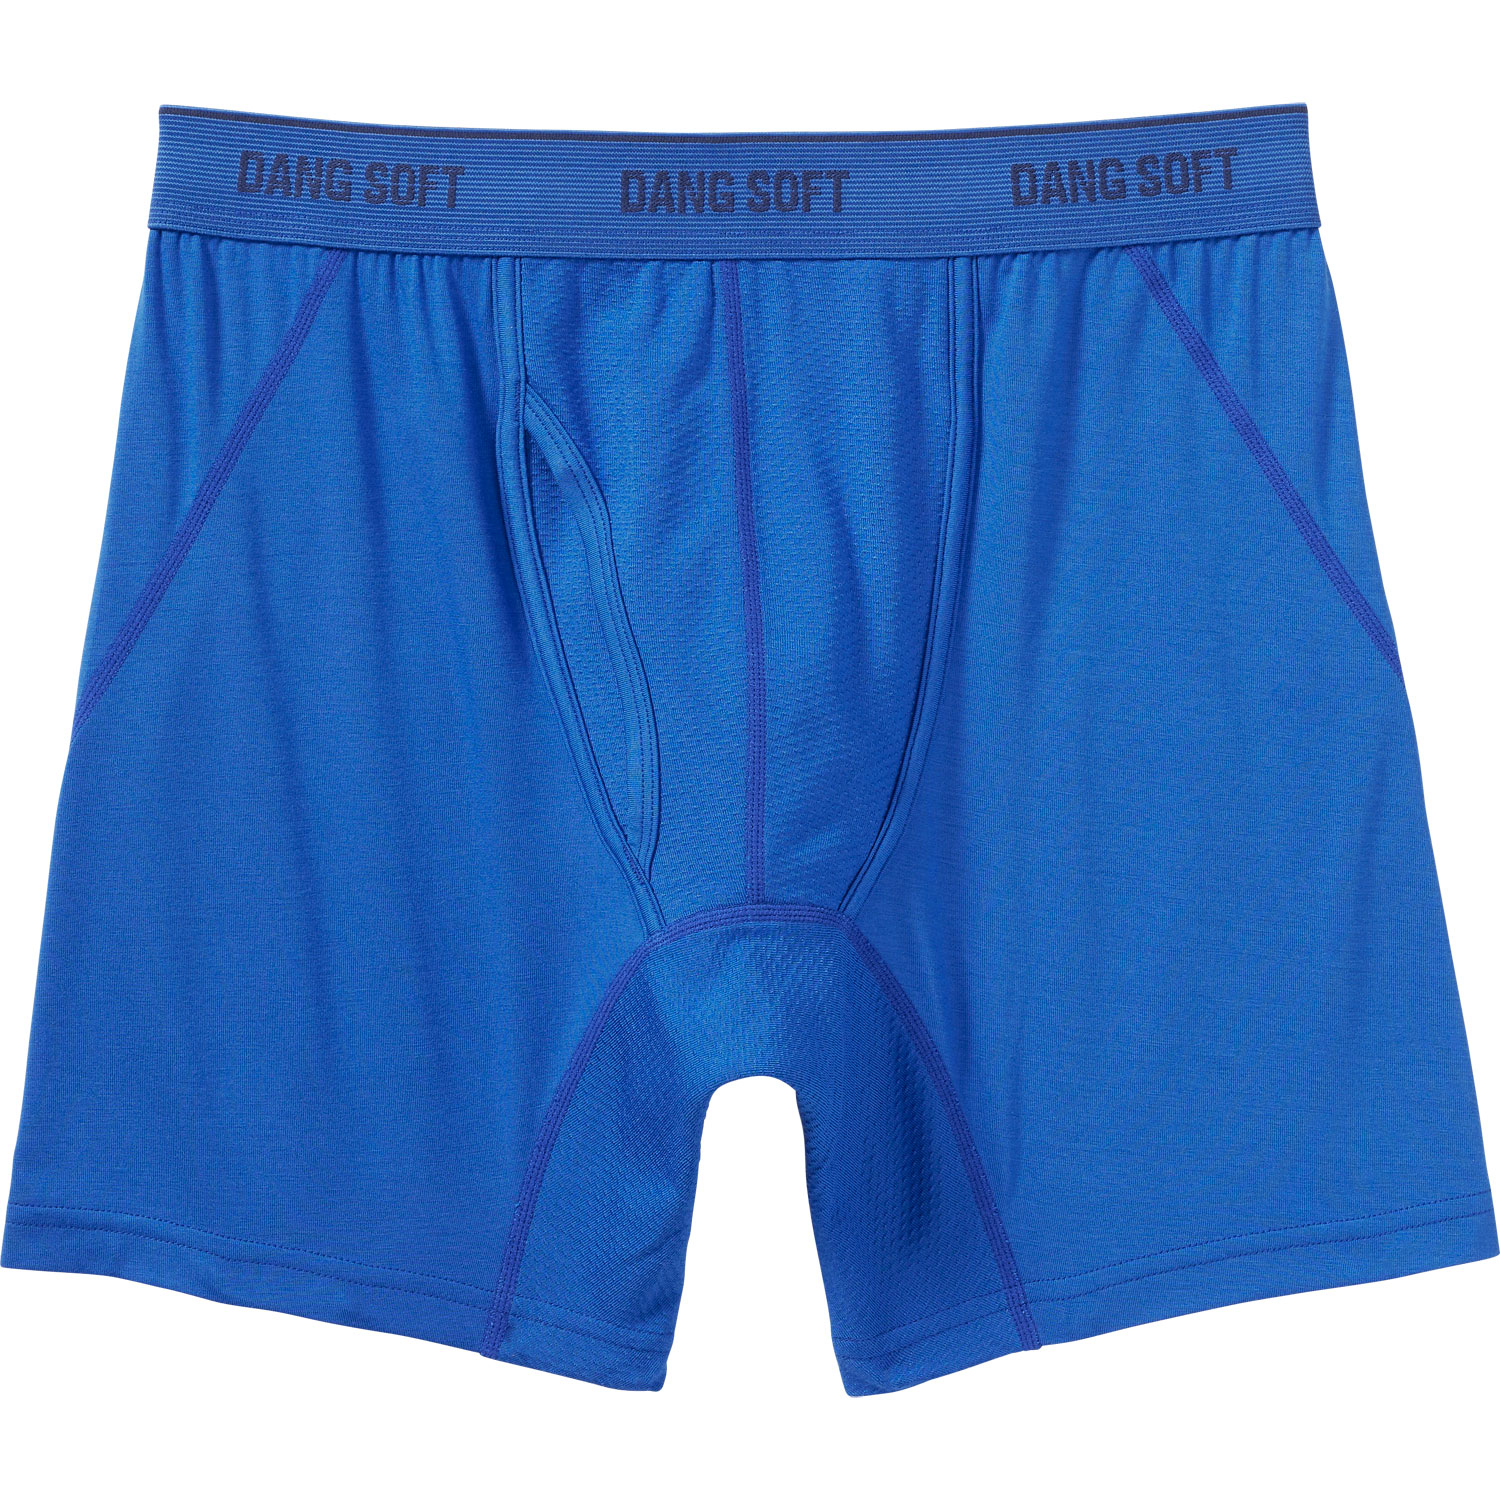 NEW men's DULUTH TRADING dang soft brief, small, spruce green blue